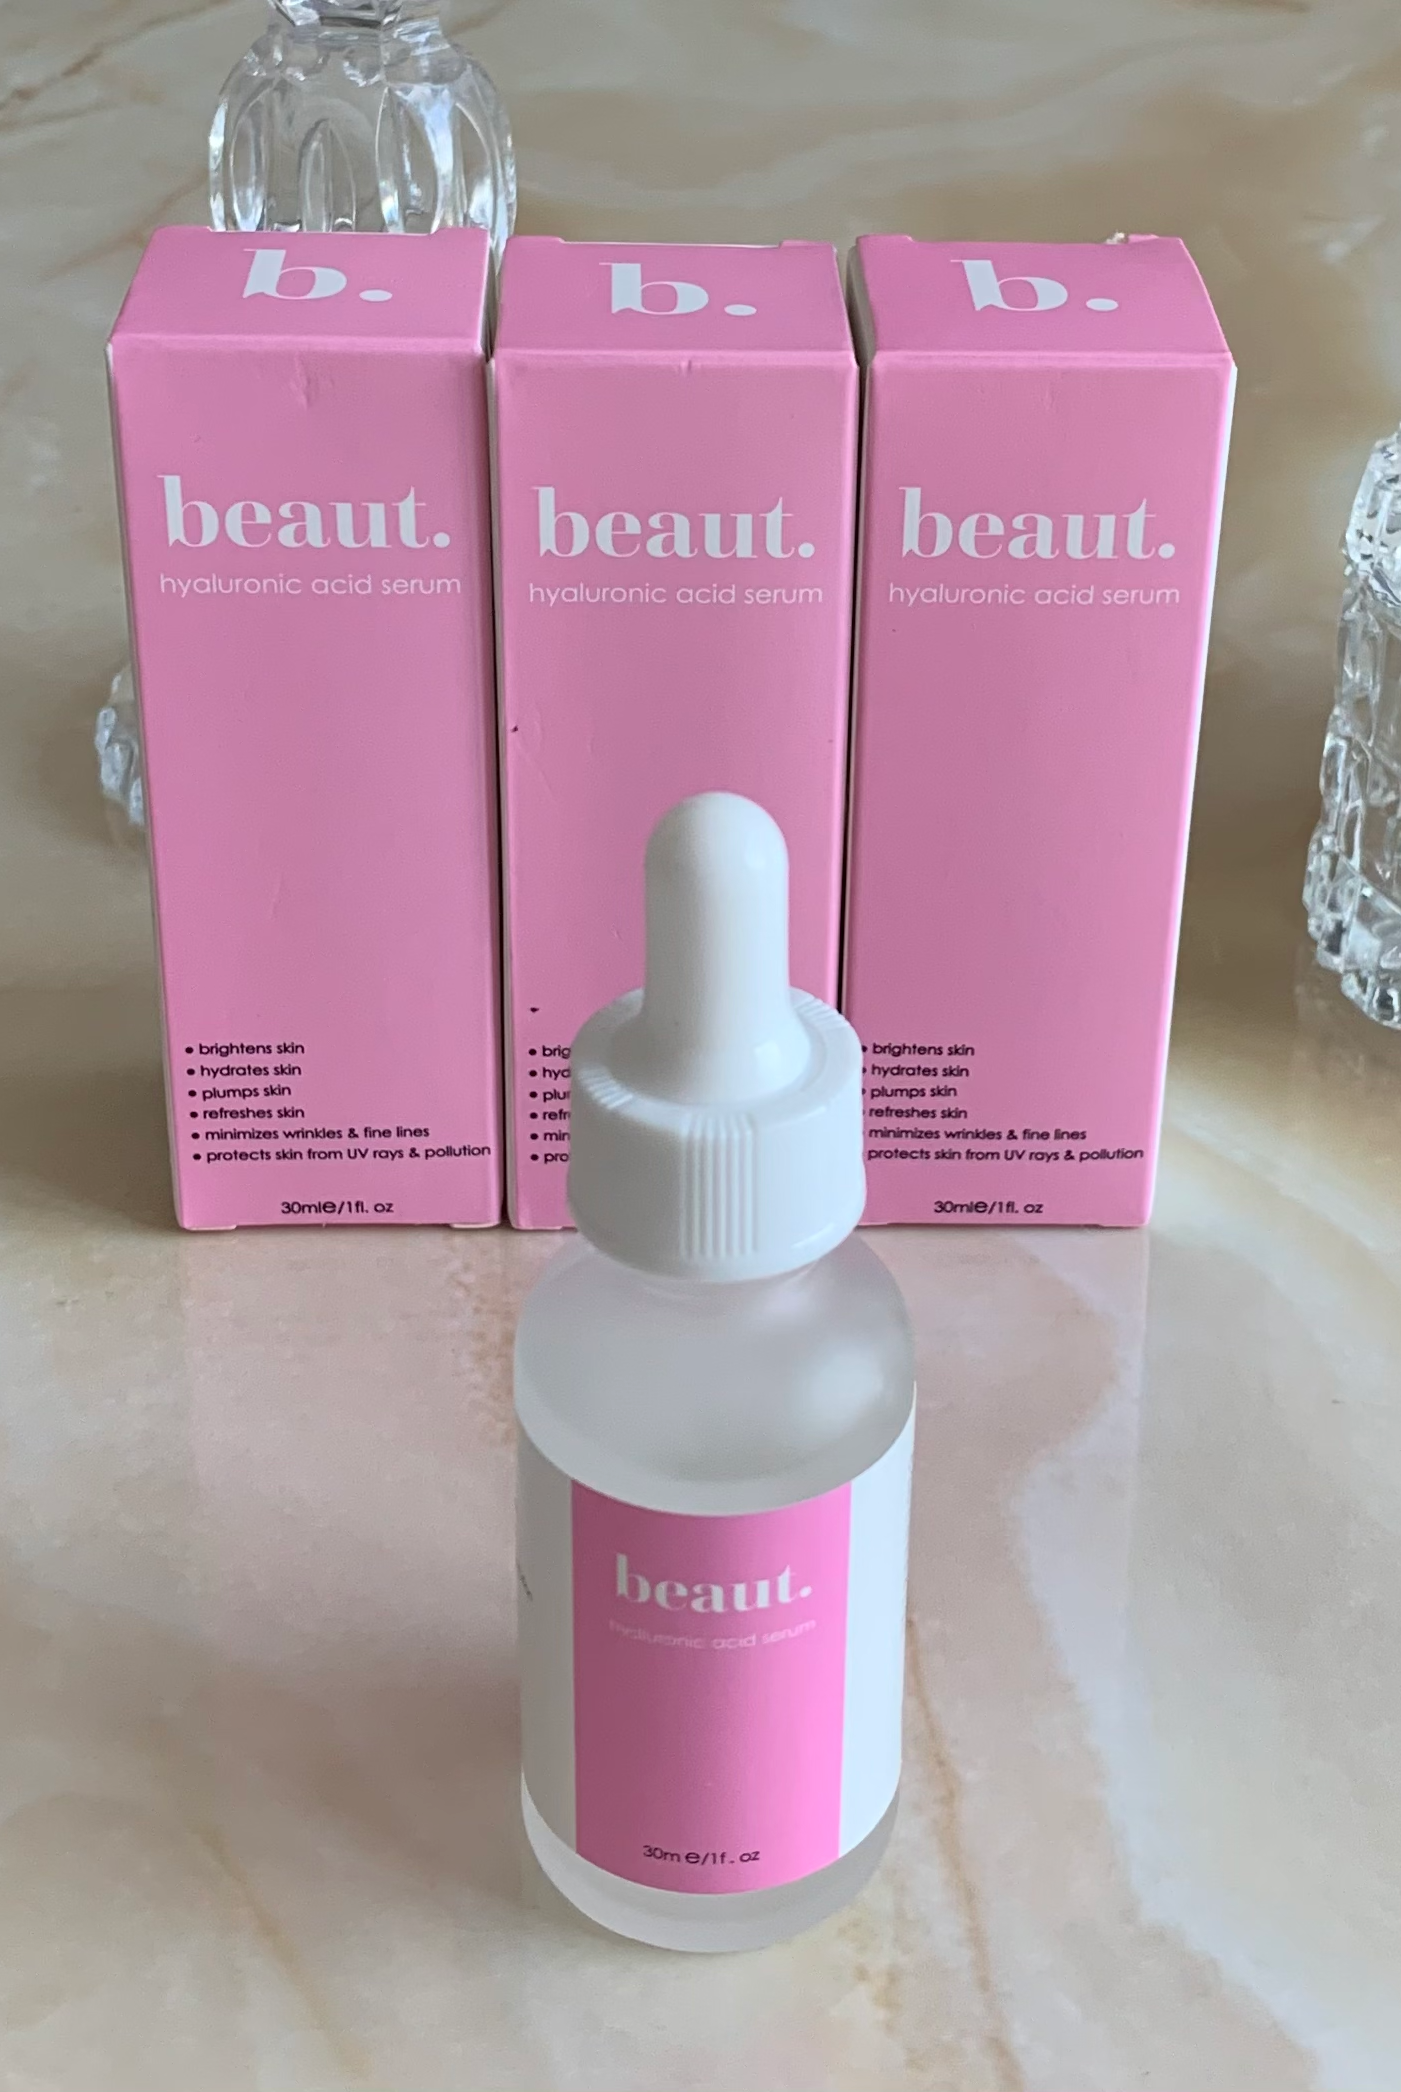 h2o boost hyaluronic acid serum-Bath & Body-beaut.beautyco.-The Lovely Closet, Women's Fashion Boutique in Alexandria, KY